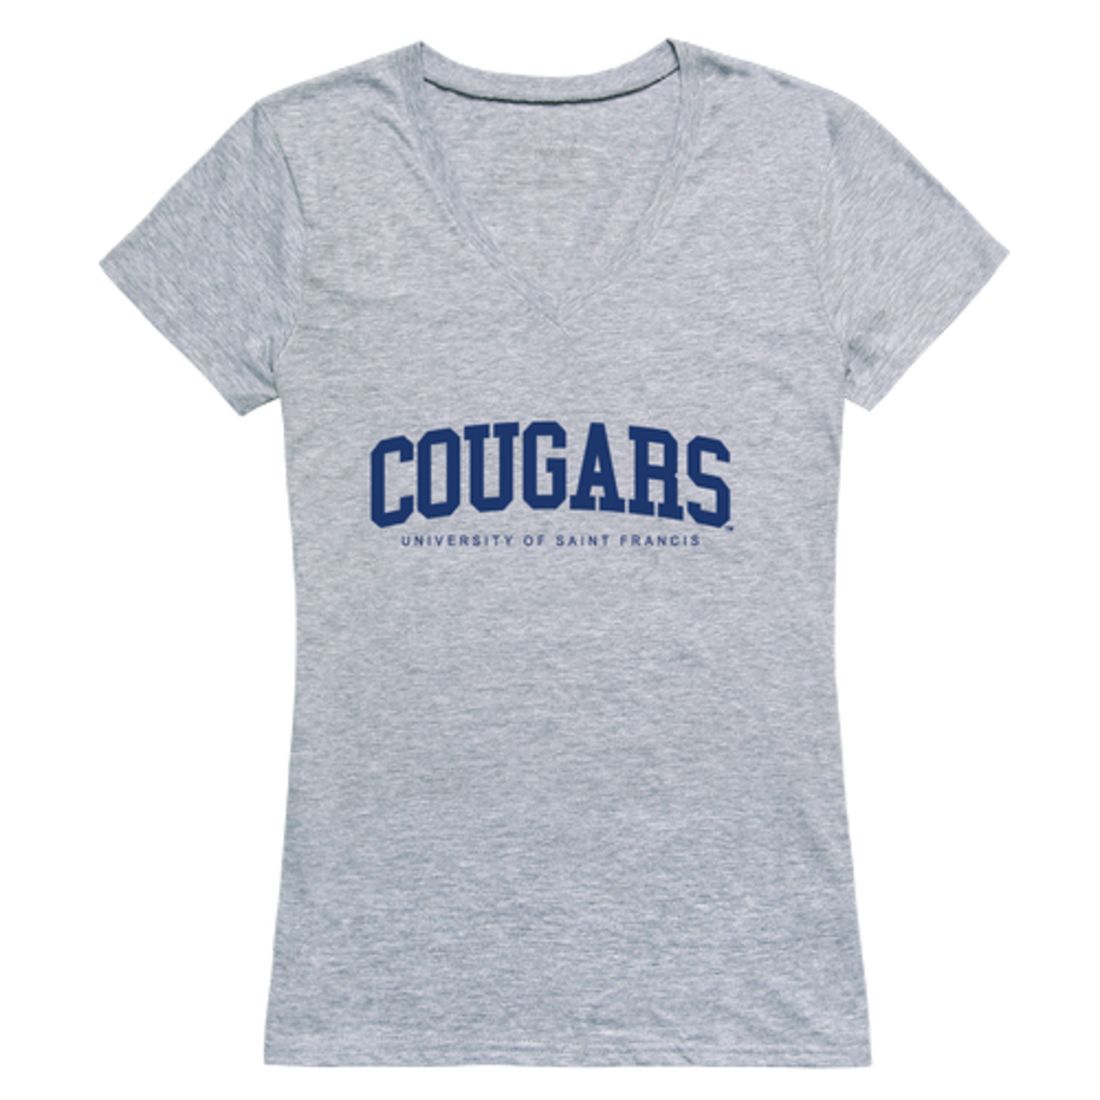 University of Saint Francis Cougars Womens Game Day T-Shirt Tee